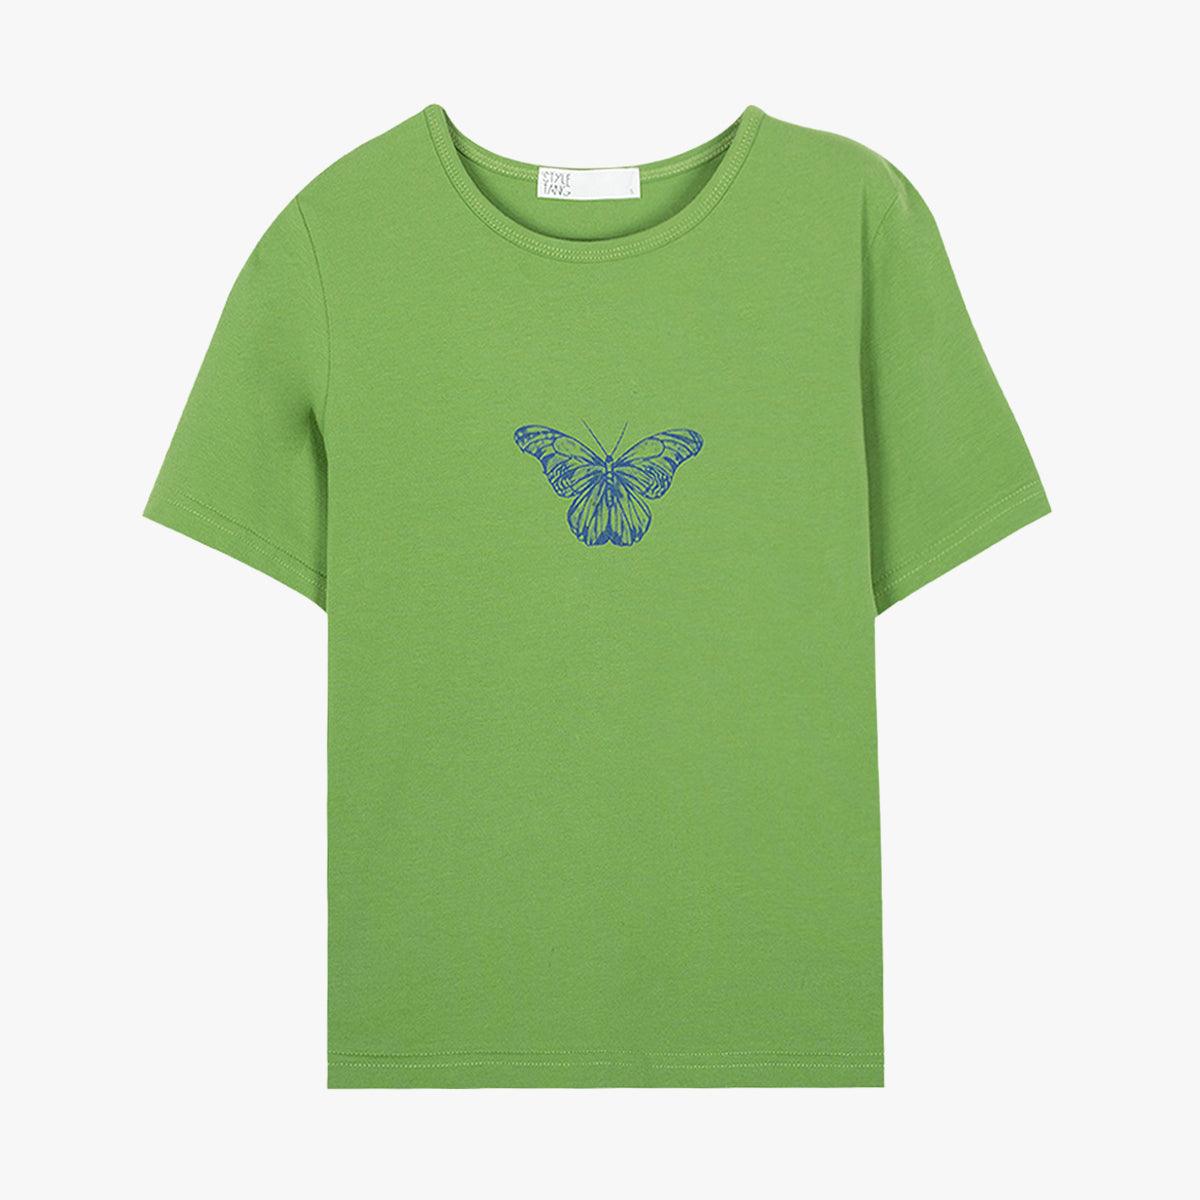 Indie Green Butterfly T-Shirt - Aesthetic Clothes Shop